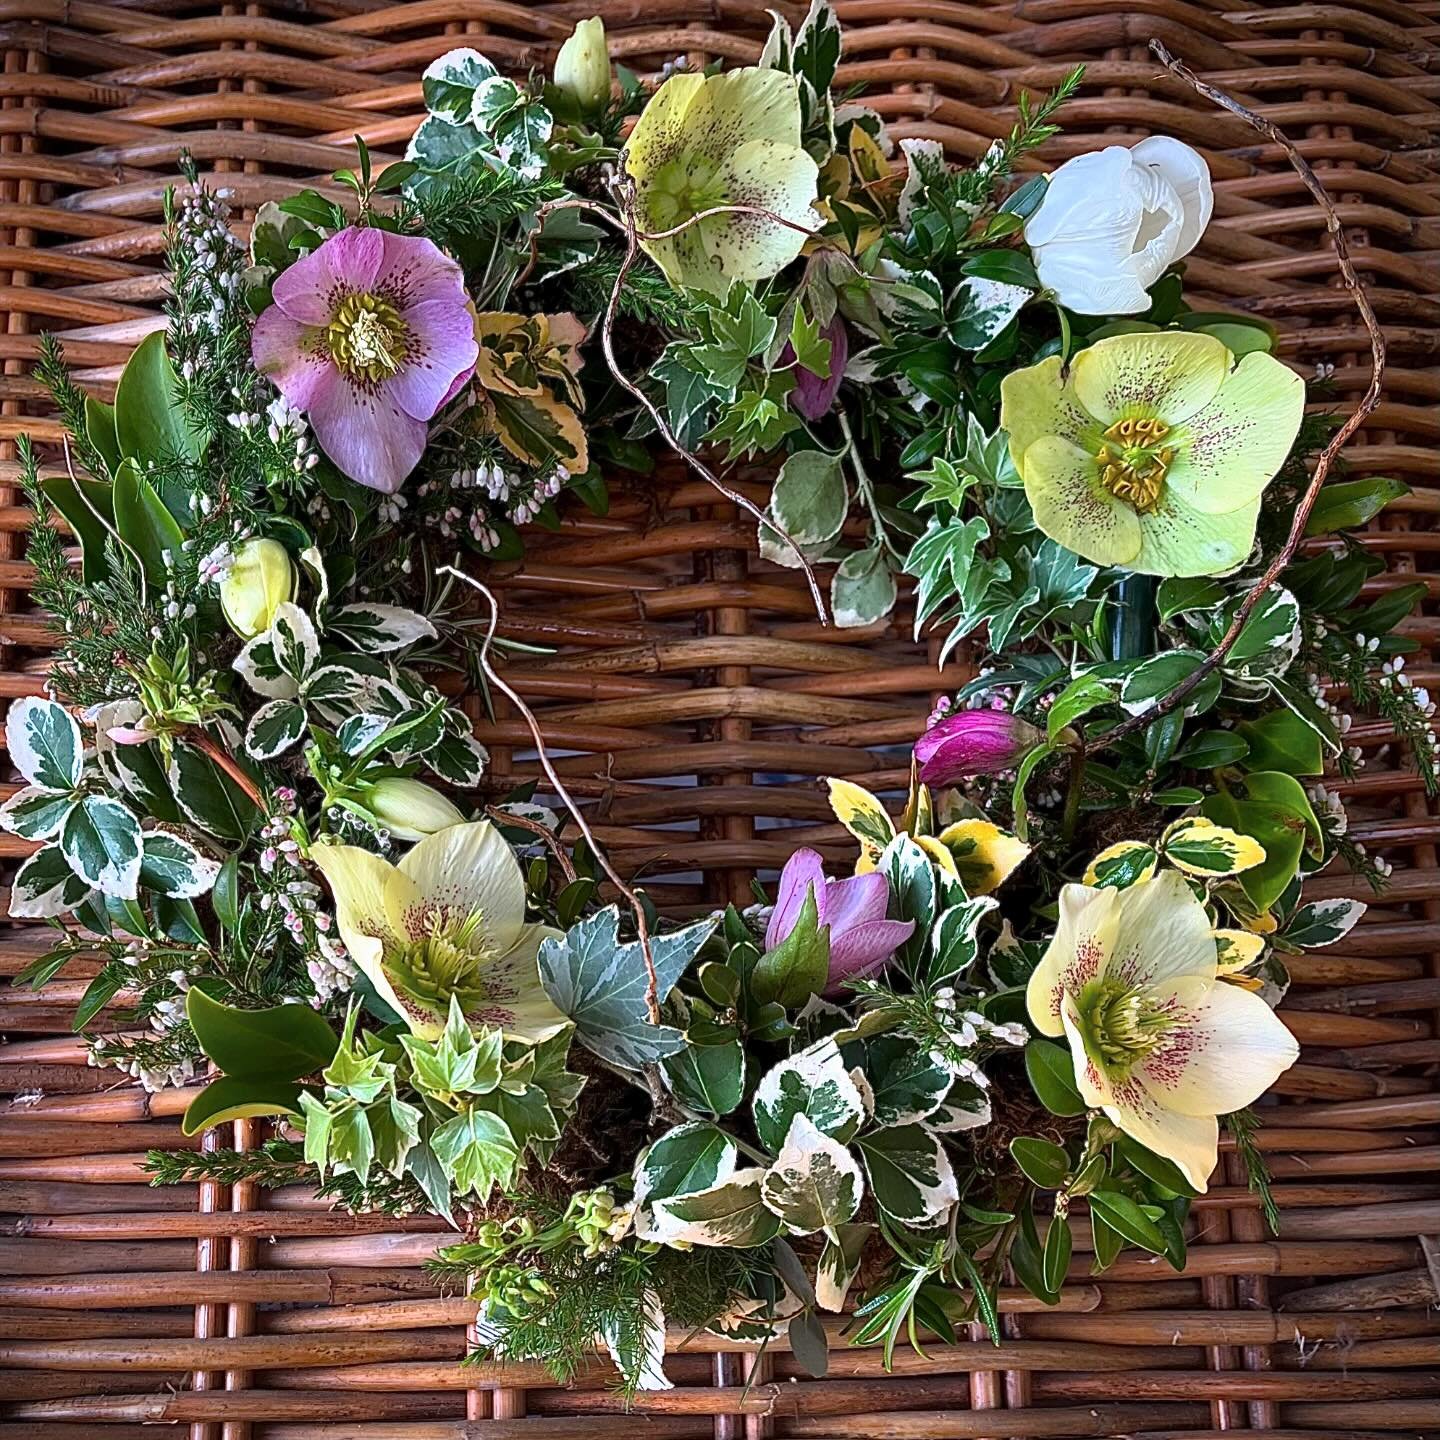 Have you heard of Farewell Flowers?

Today, Monday 6th May, Farewell Flowers launches its Members Directory - a list of florists around the country who practice sustainable funeral floristry. This means they create all their funeral arrangements natu